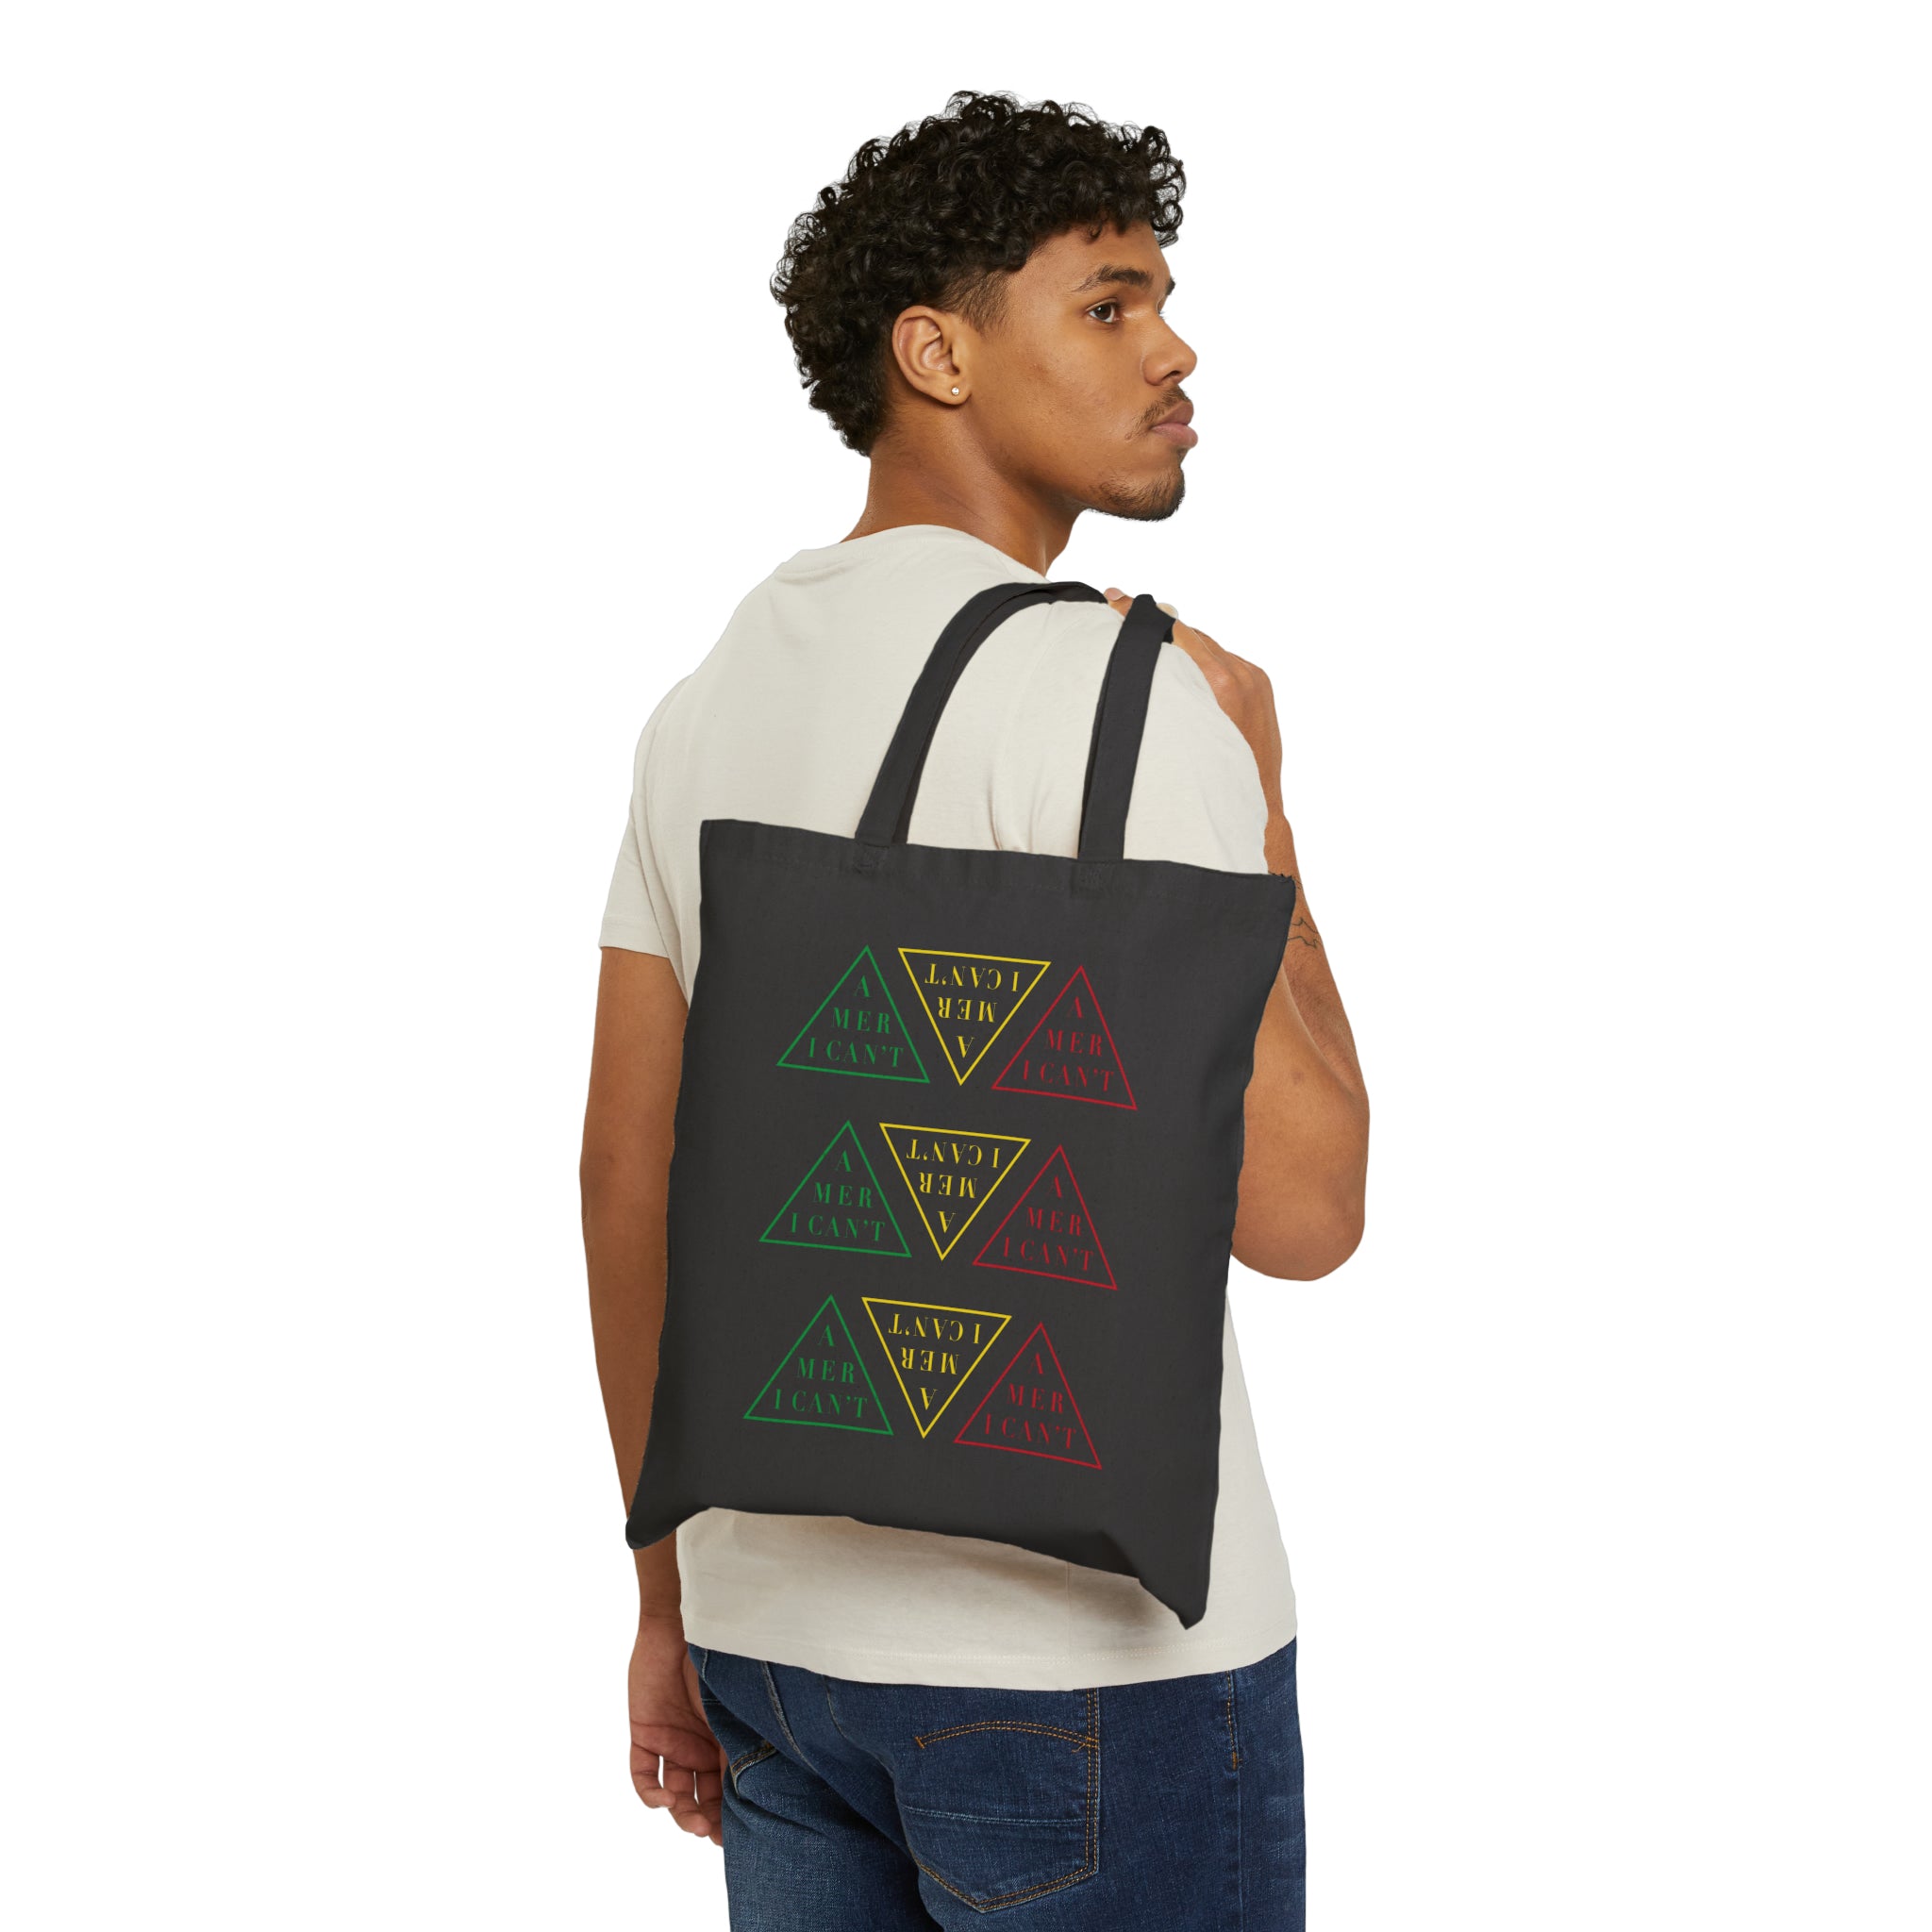 Americant (Peoples Colors) Canvas Tote Bag